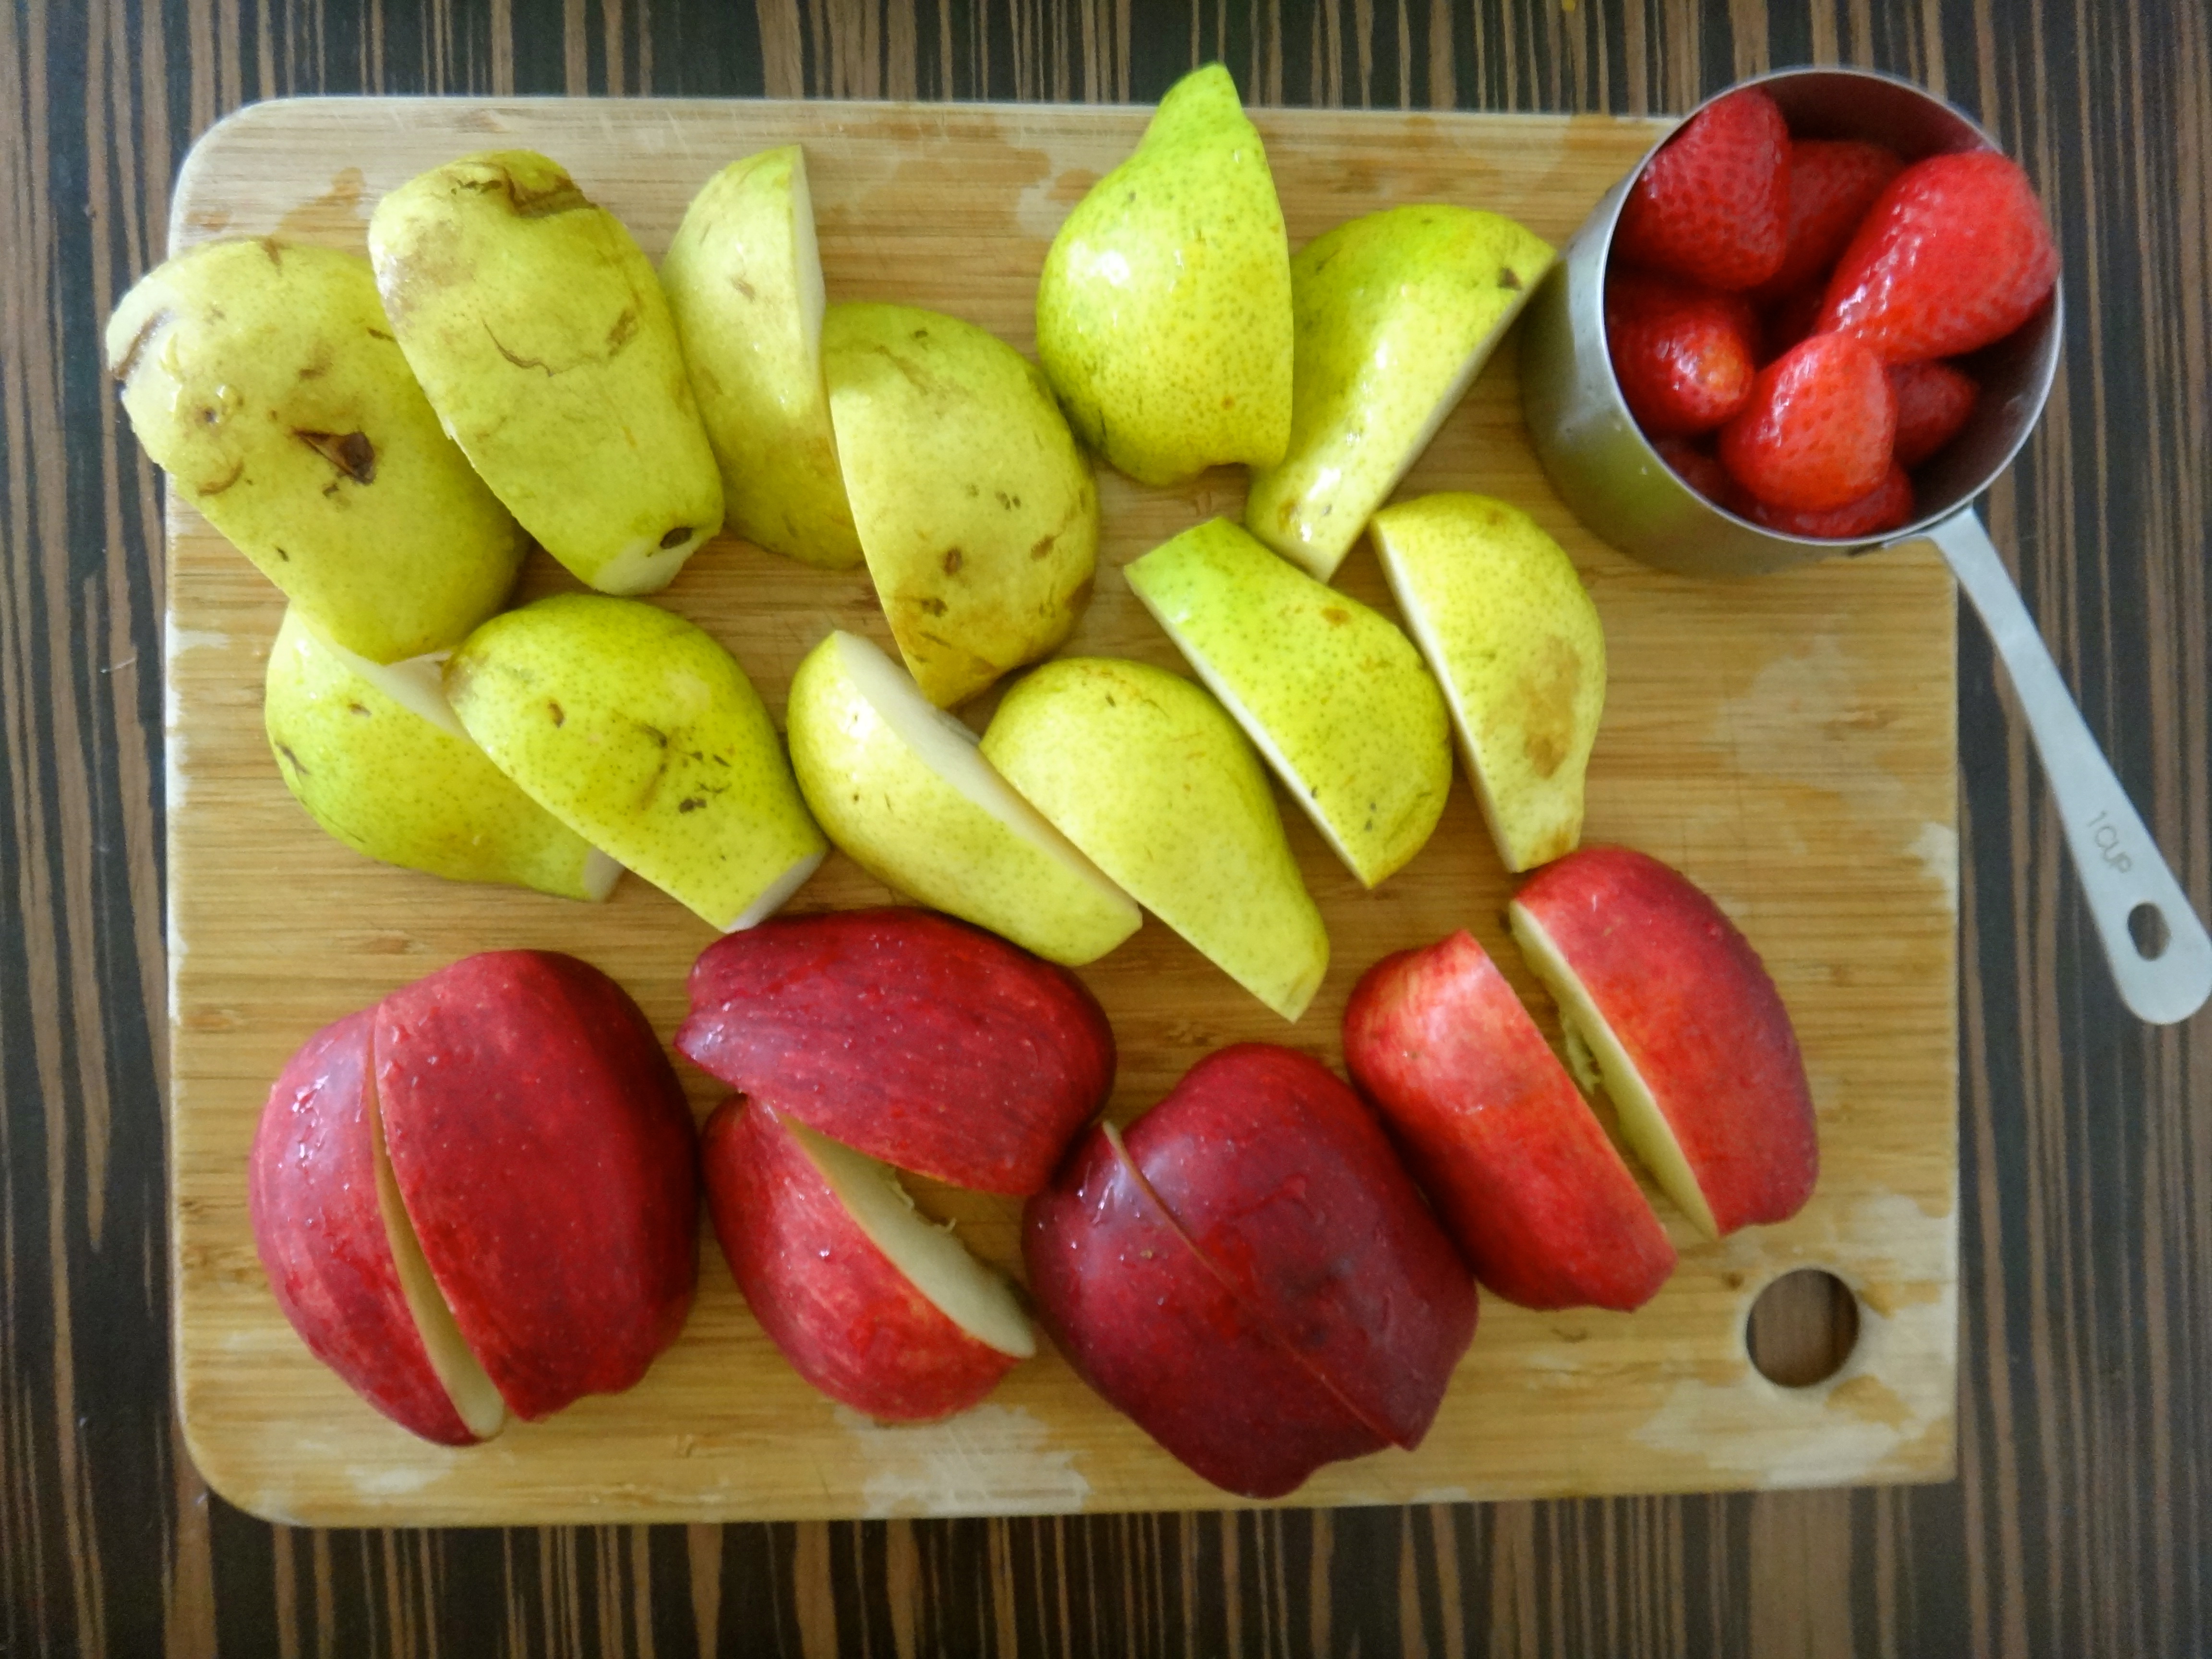 Apple, Pear & Strawberry Juice} | HealthY, HaPpy & WhOle